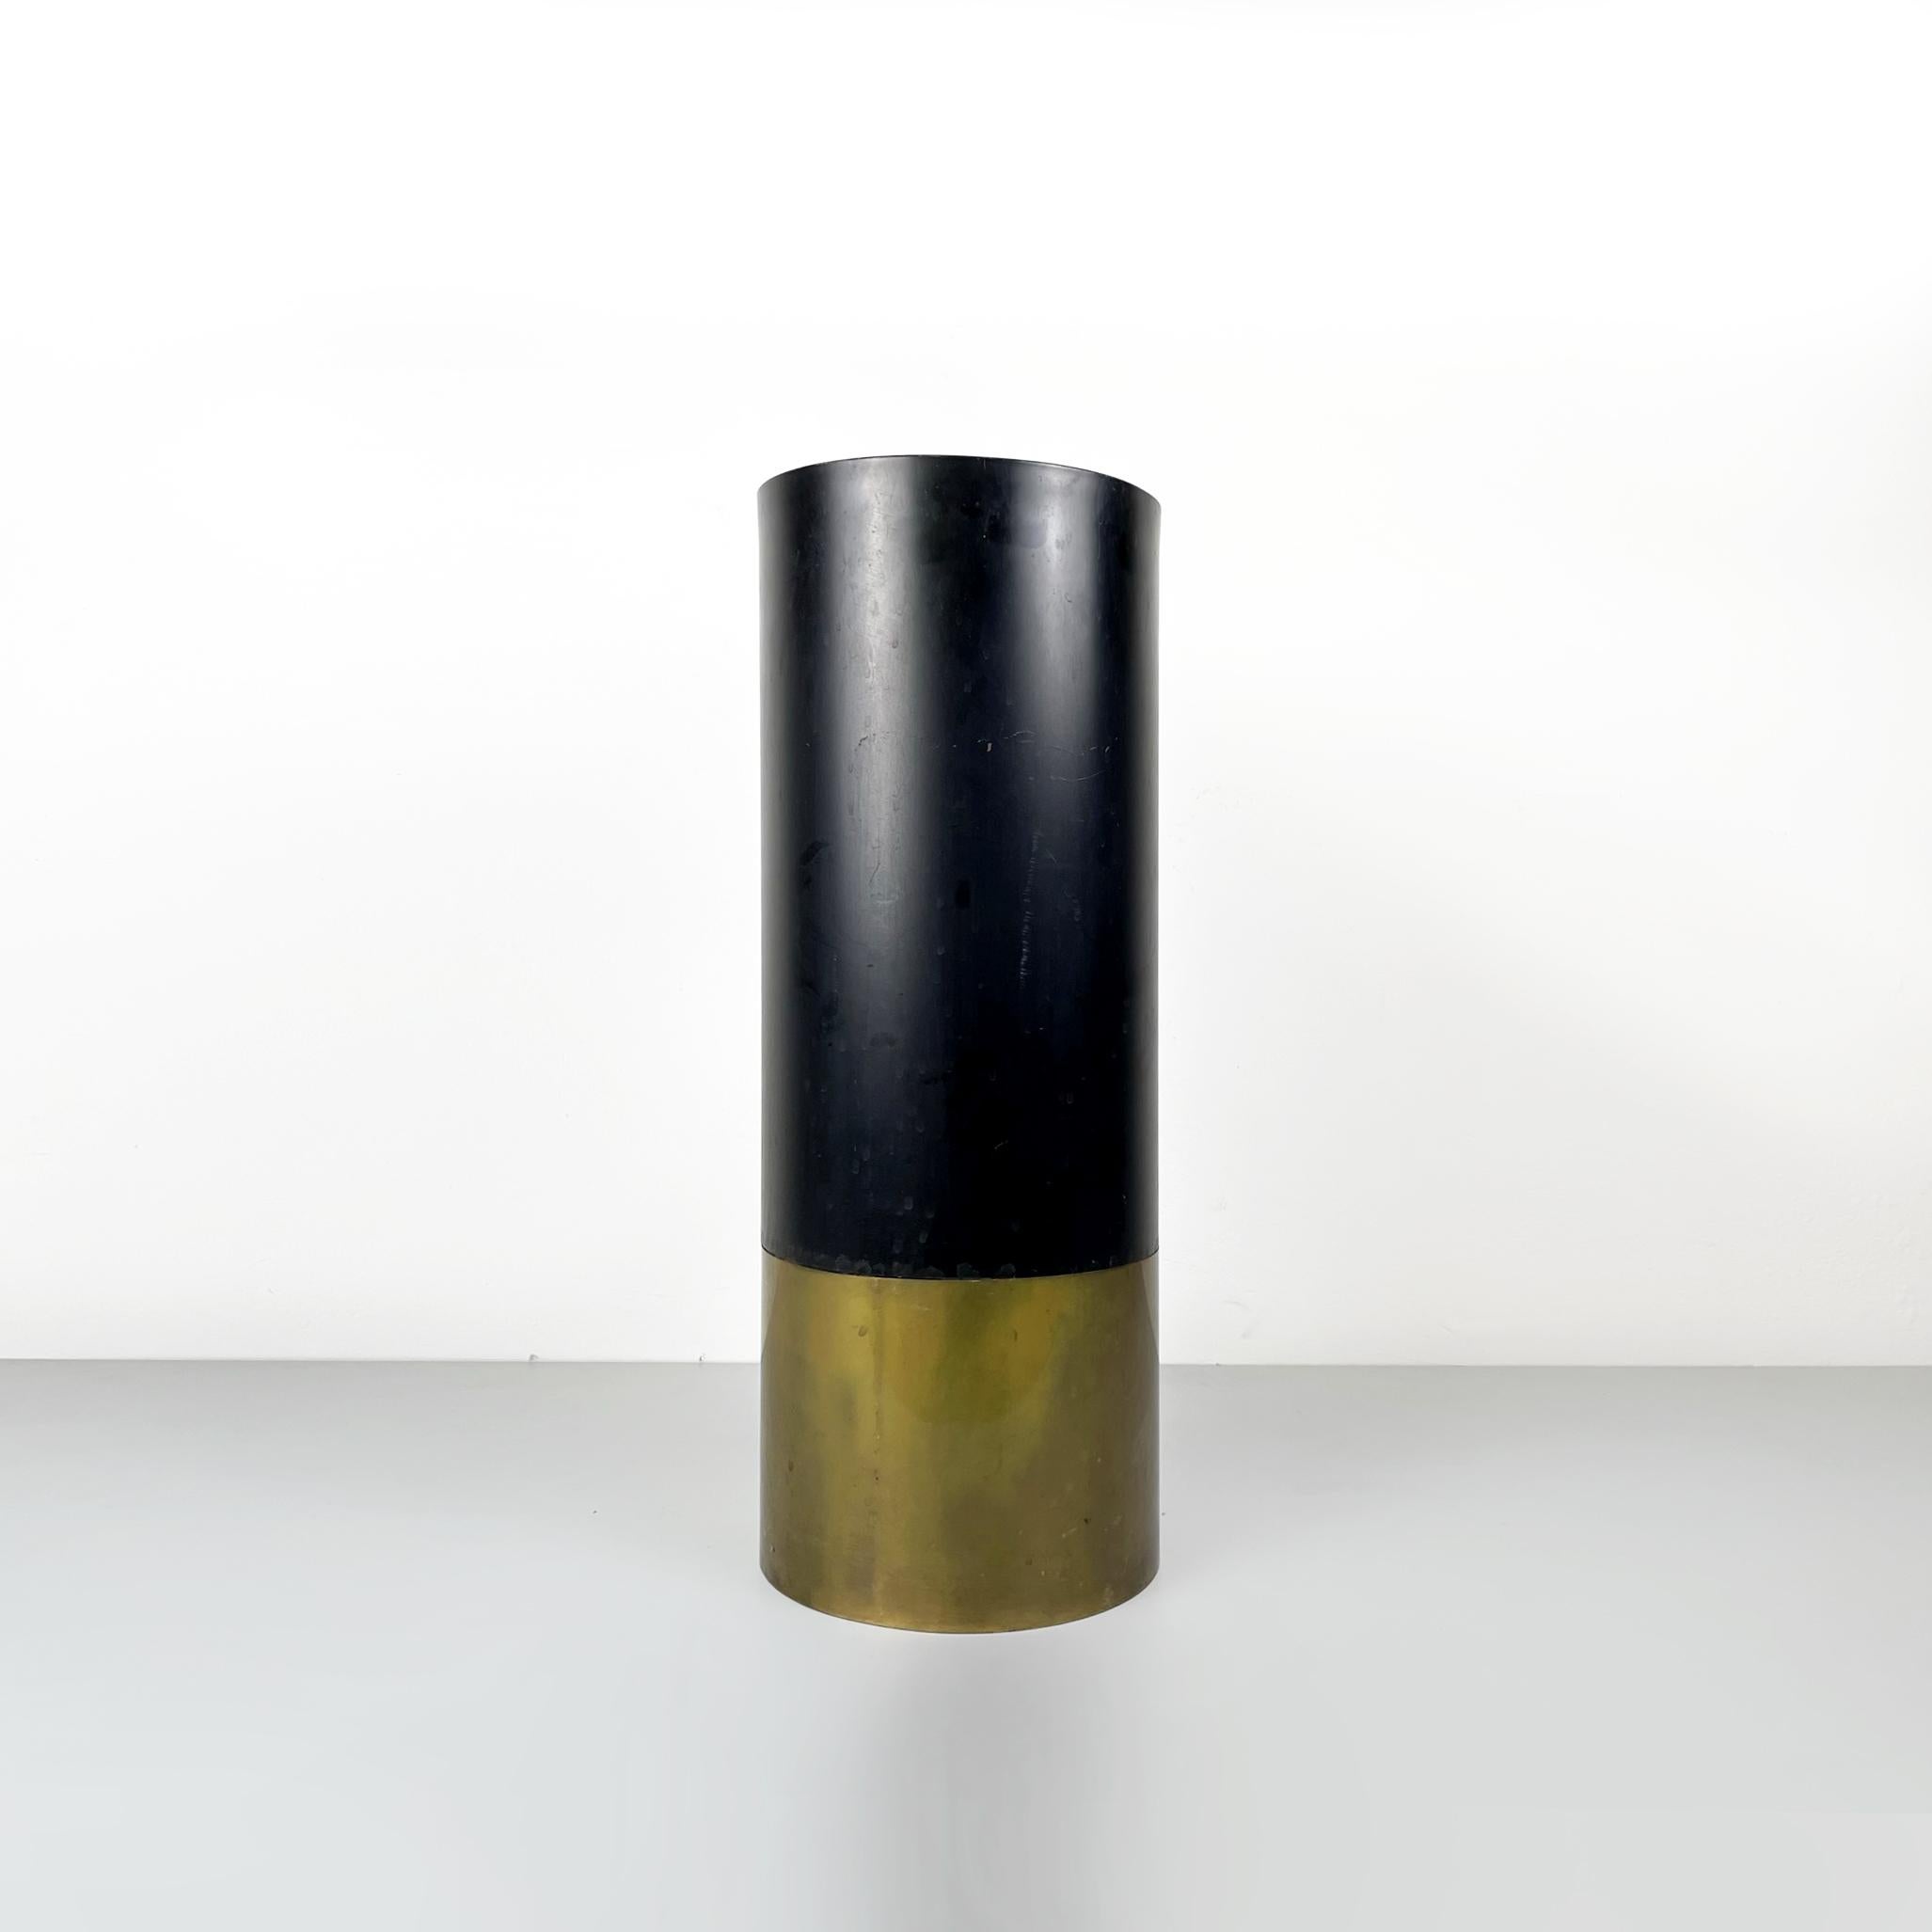 Italian Mid-Century Umbrella stand Cartuccia Pto2 by Luigi Caccia Dominioni for Azucena, 1950s
Cylindrical umbrella stand mod. Cartuccia Pto2 in black painted metal at the top and in brass at the base.
Produced by Azucena in 1950s and designed by